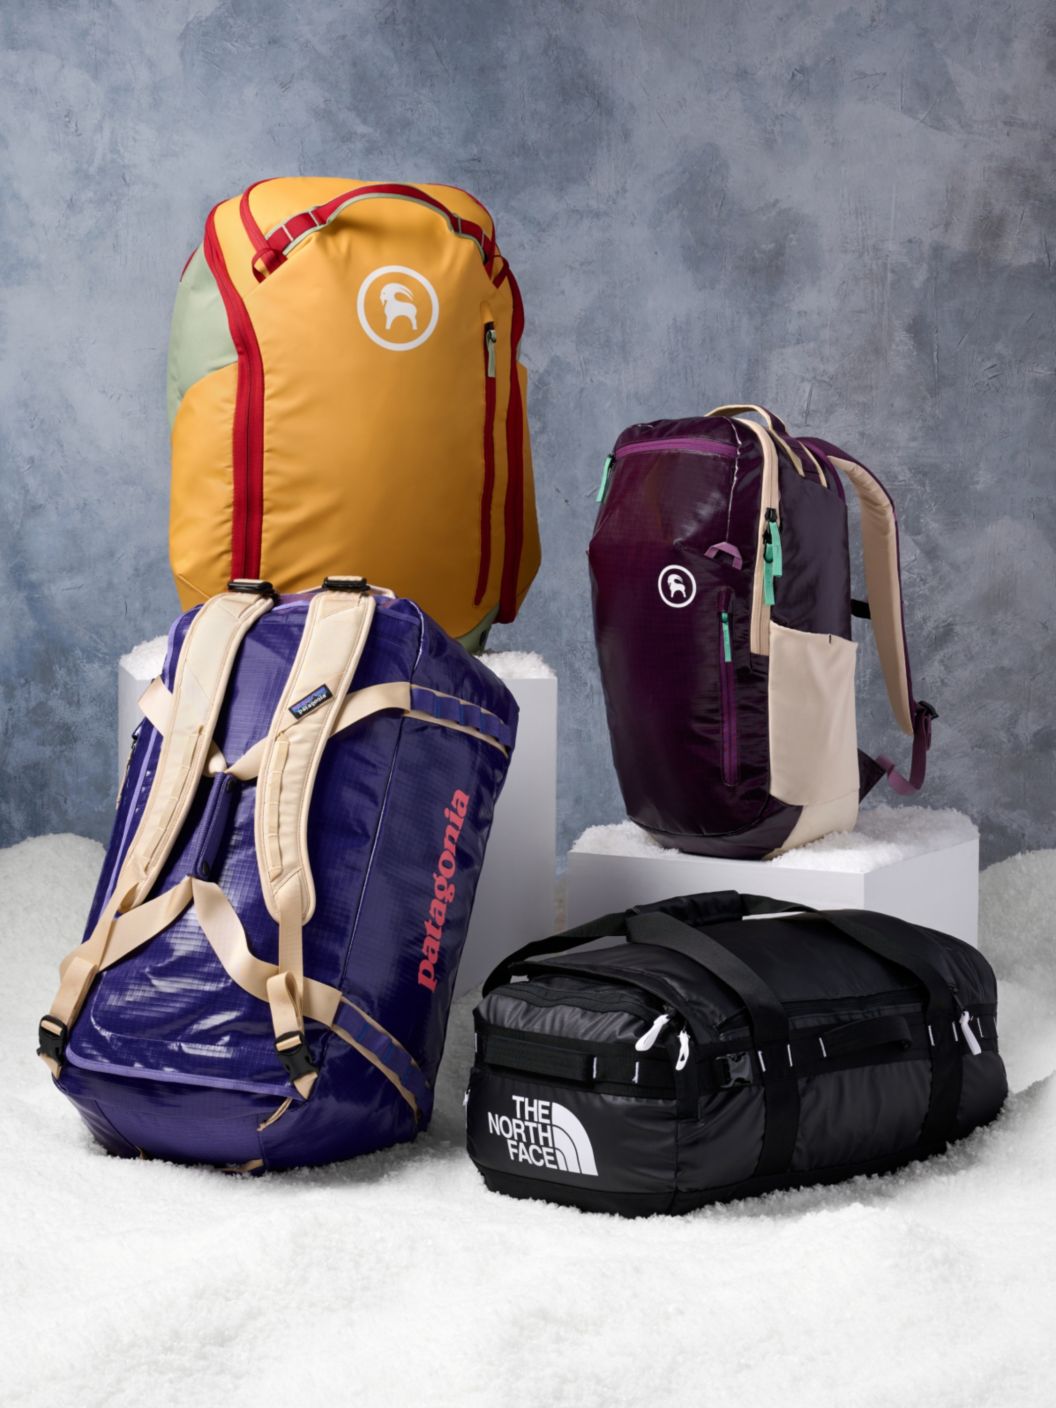 A collection of duffel bags, backpacks, ski bags & totes. 